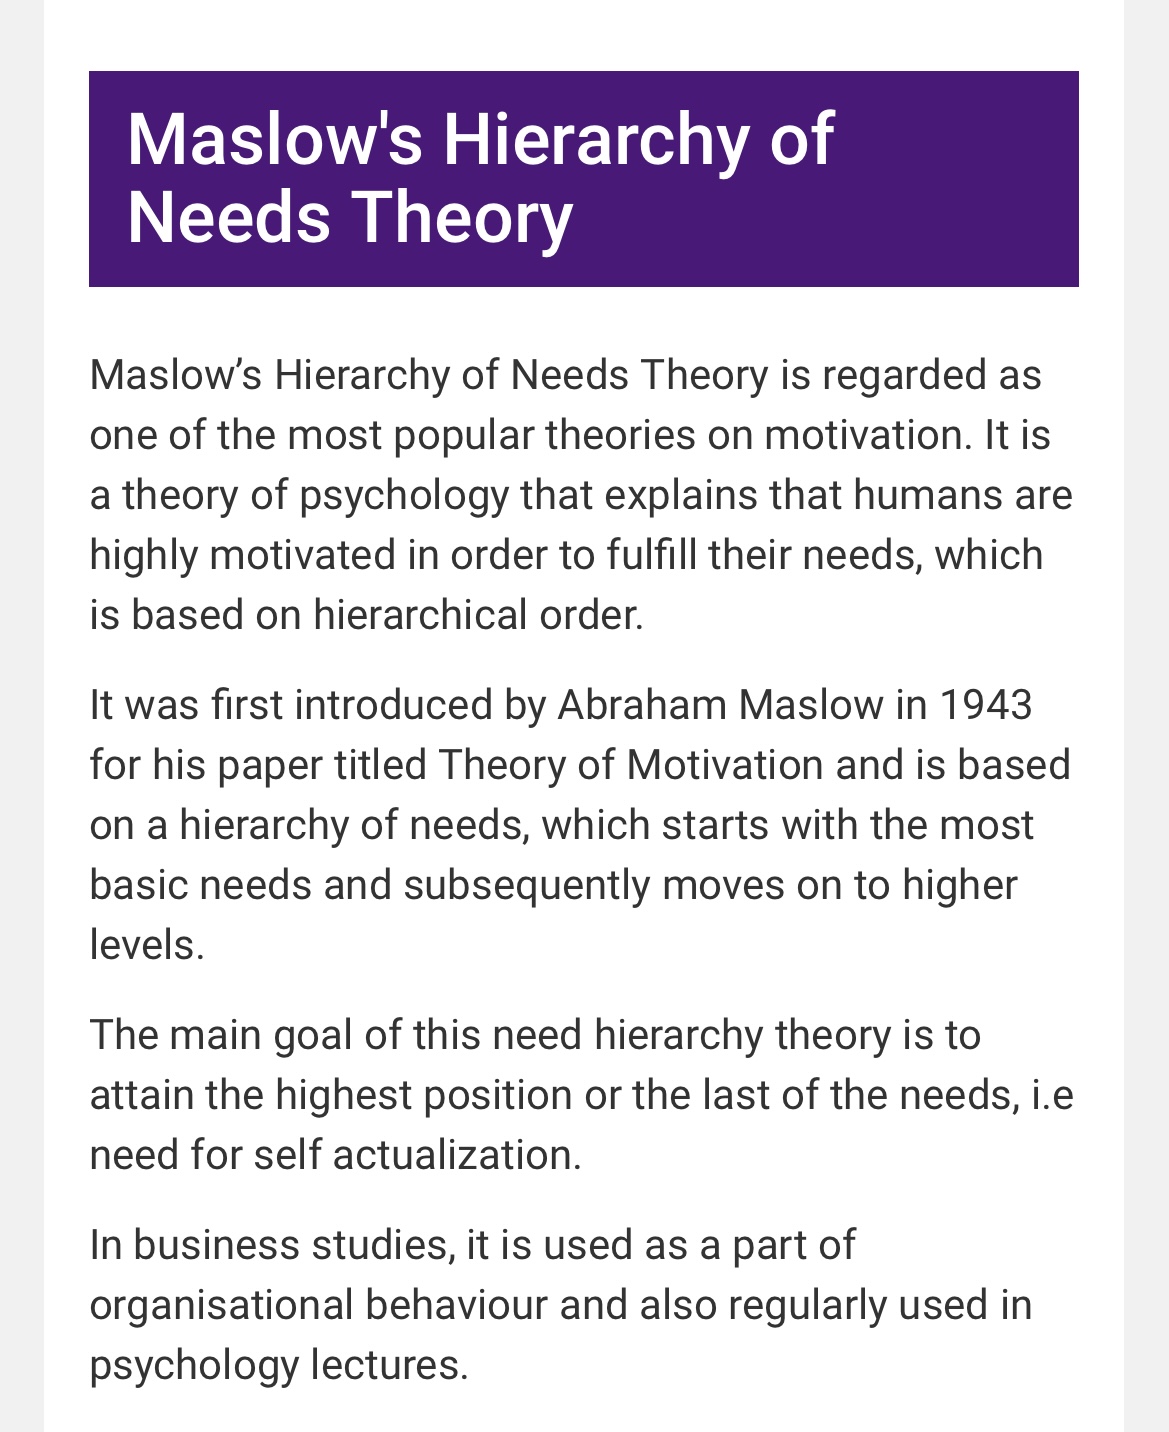 Maslow's Hierarchy of Needs Theory-605DD59E-A9CD-494B-BE63-6A7F083894B1.jpeg